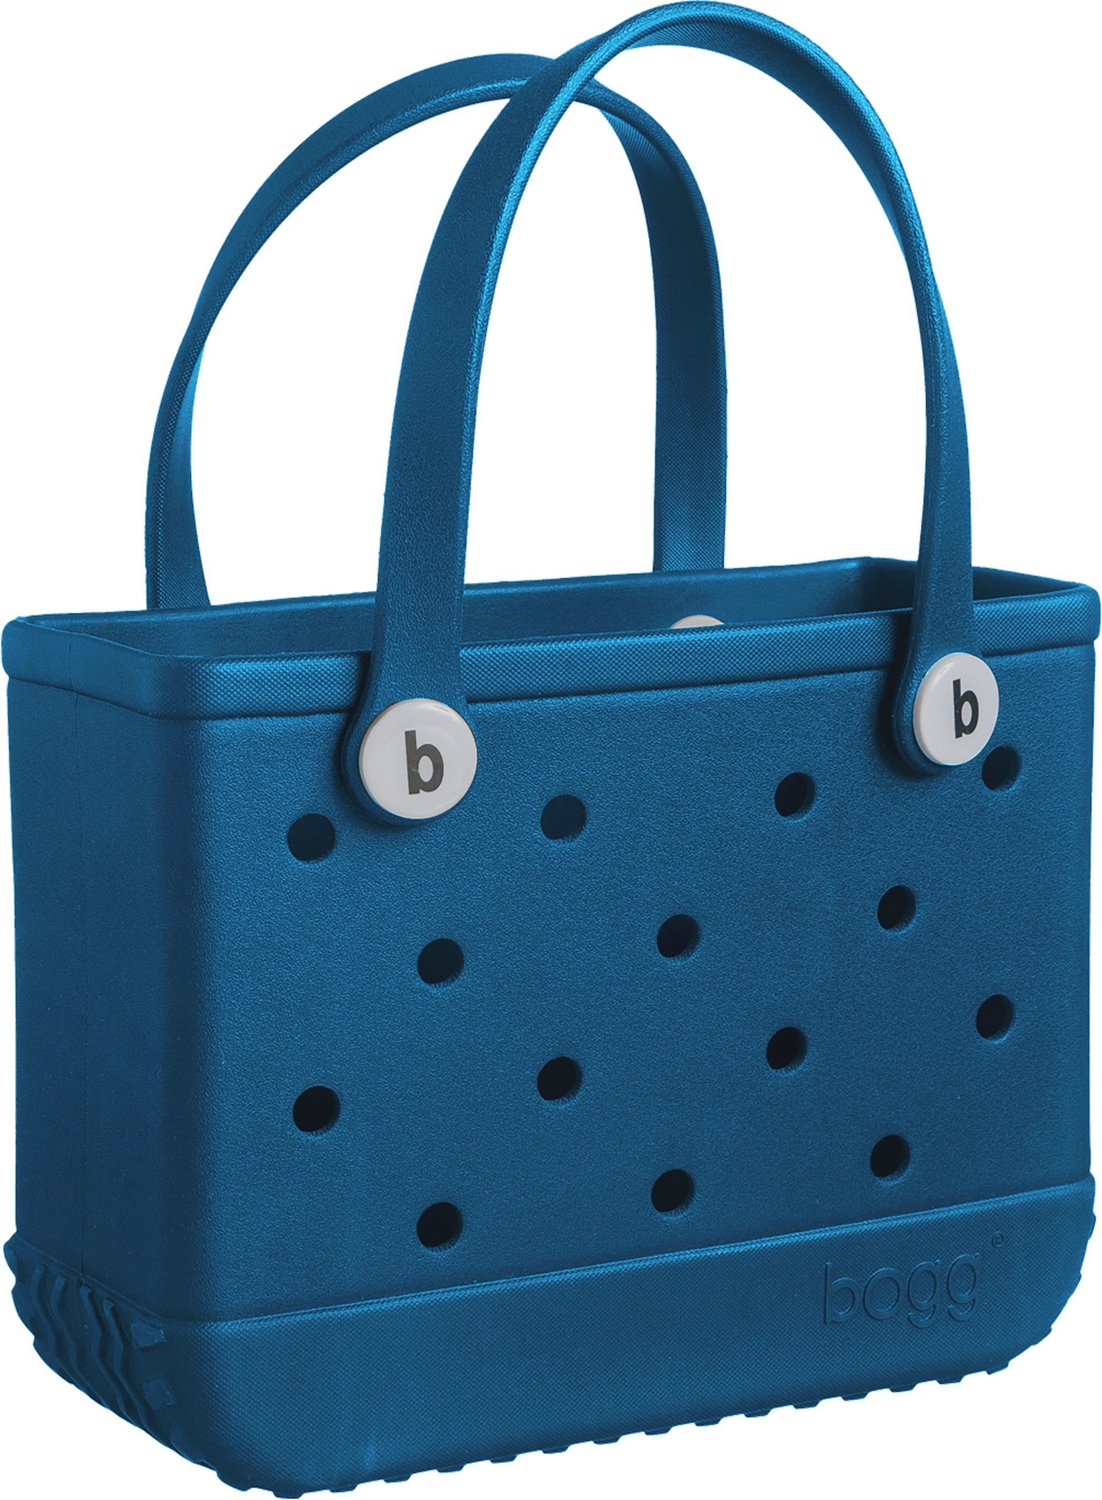 Bogg Bag Bitty Bogg Tote  Free Shipping at Academy